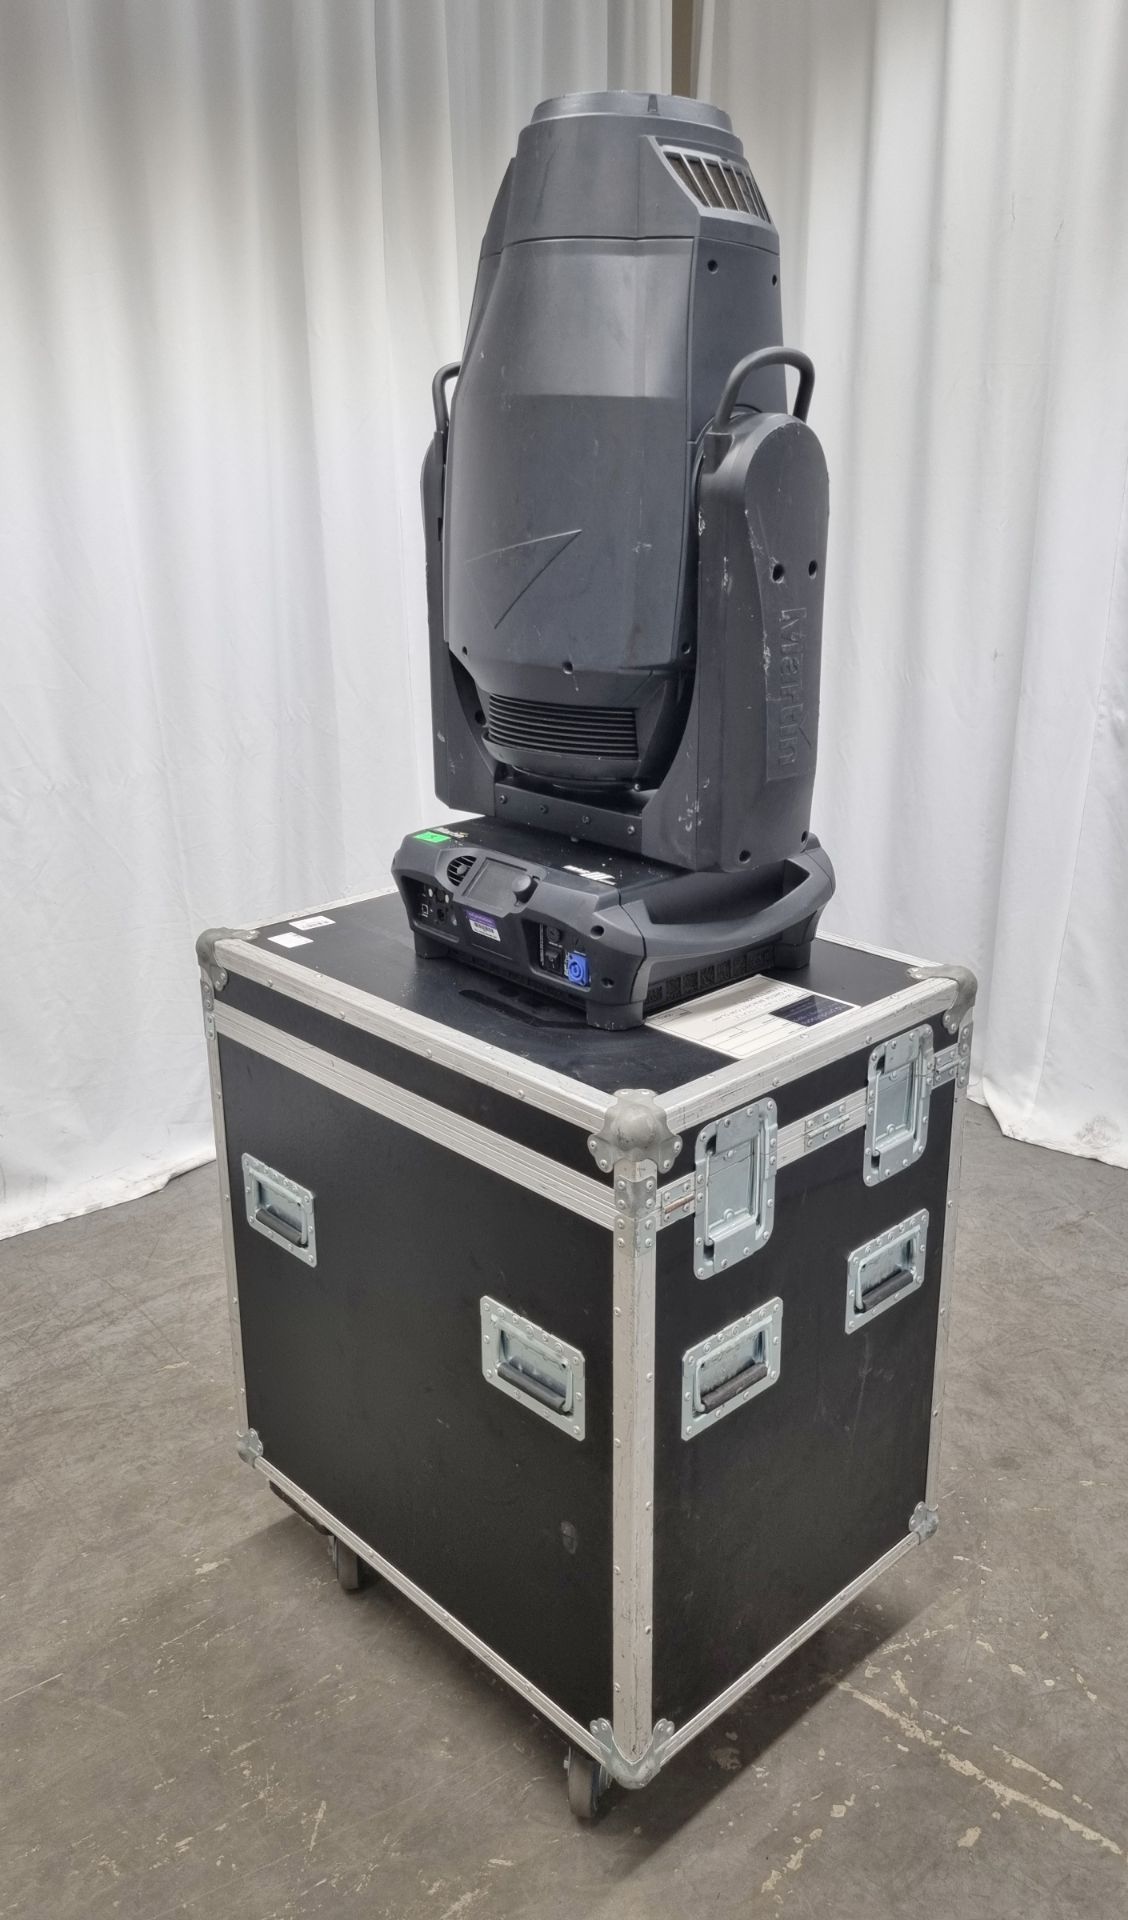 Martin Mac III Profile 1800W high output moving light with flight case on wheels - L 800 x W 600 x H - Image 2 of 8